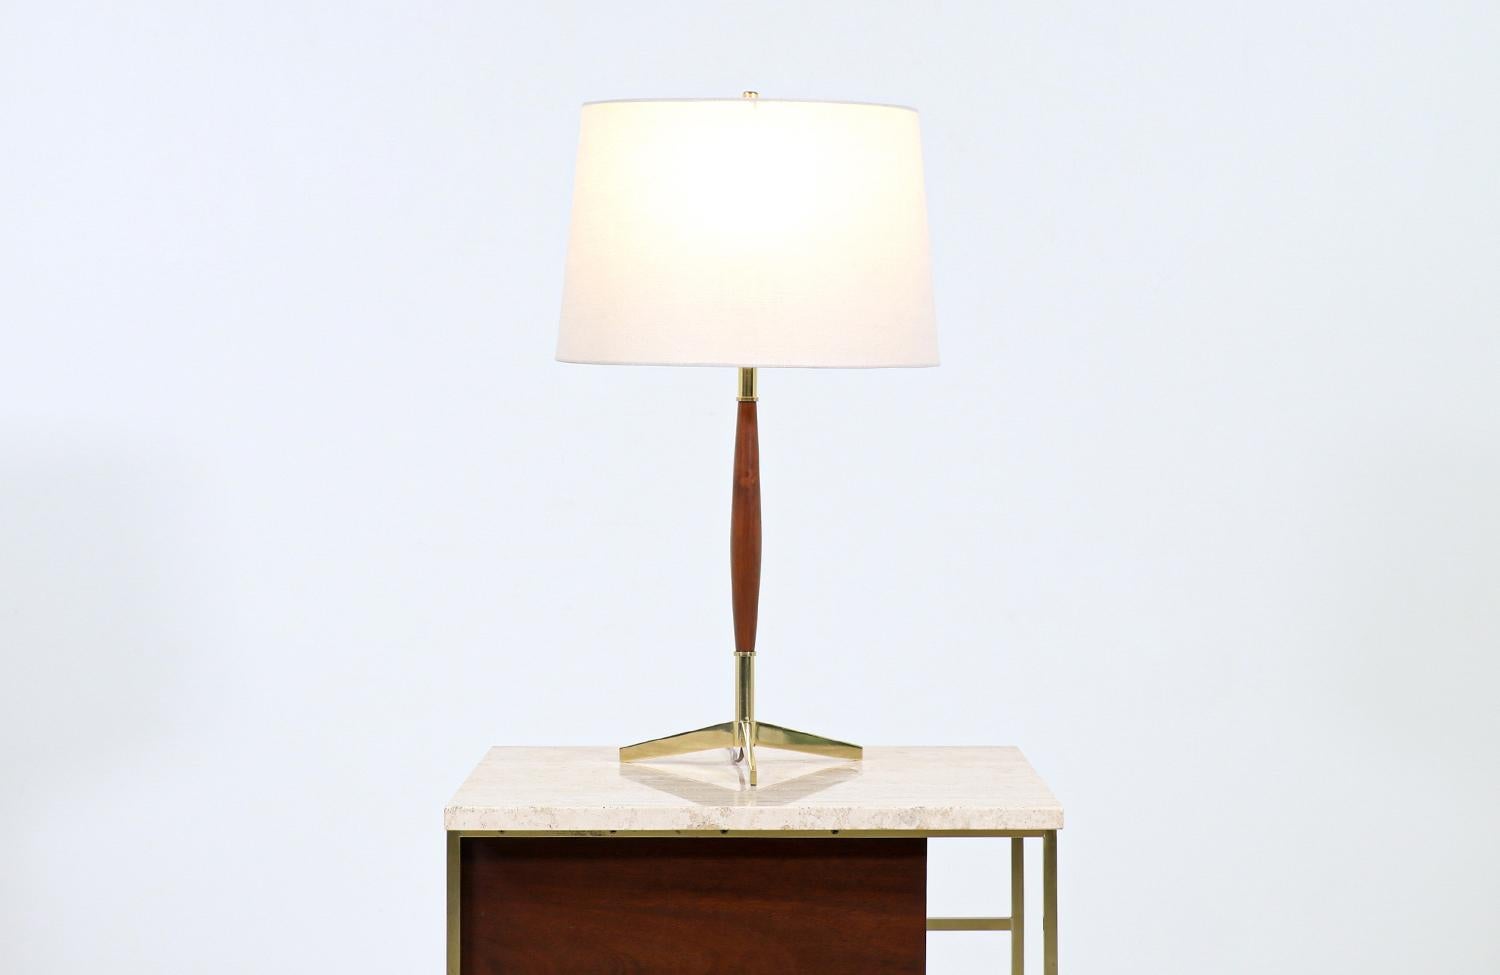 Dimensions:

26in H x 10in W x 10in D
Lamp shade: 10in H x 15in W.

_______________________________________________________________

Transforming a piece of Mid-Century Modern furniture is like bringing history back to life, and we take this journey